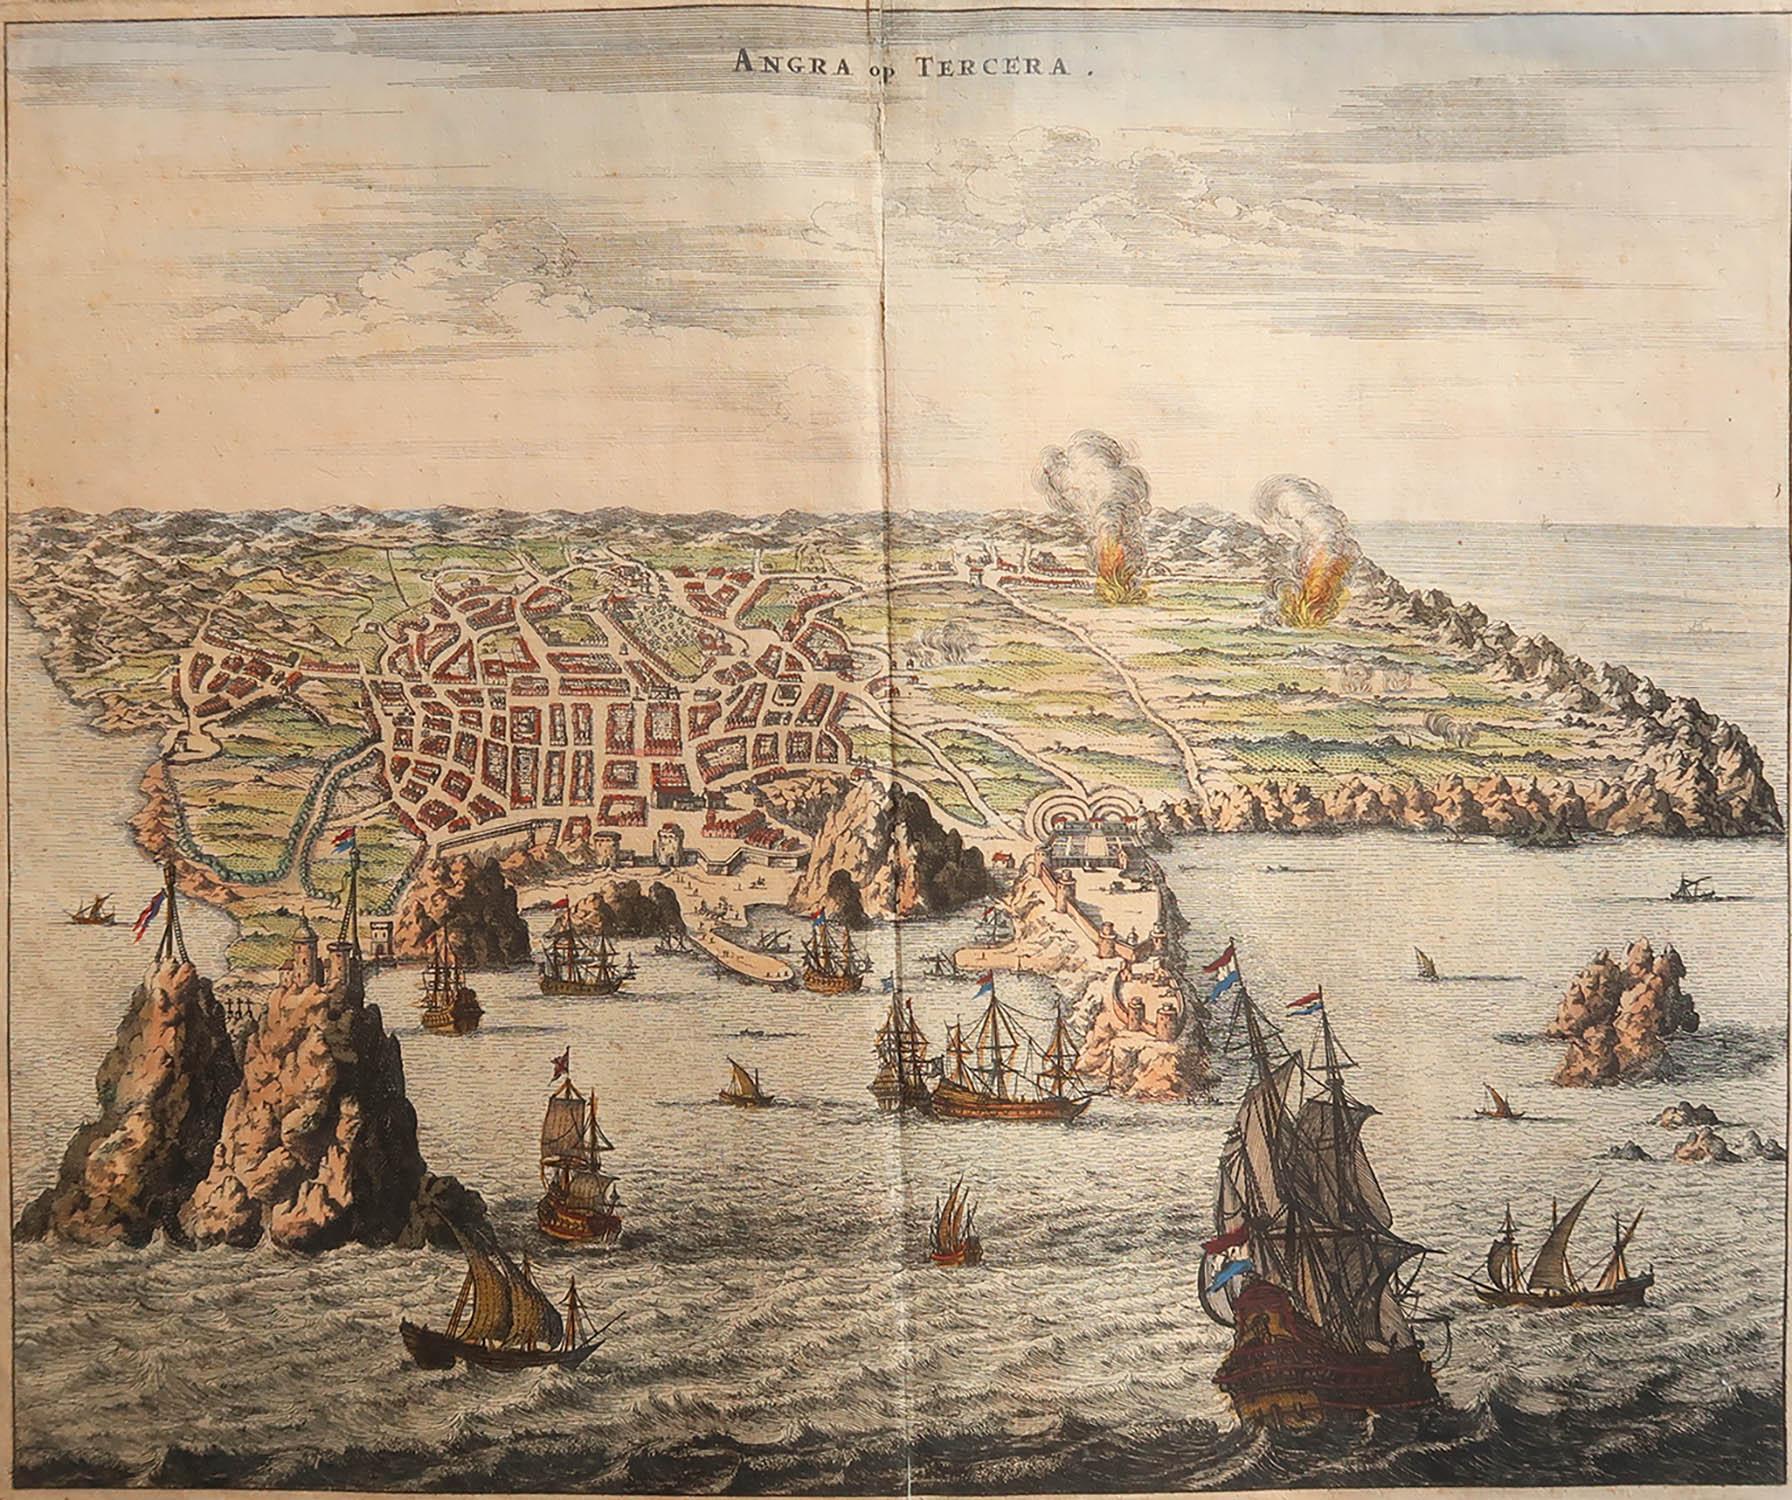 Great map or birds eye view of Angra, Azores

Copper-plate engraving. Hand colour

By John Ogilby

Published C.1670

Full margins

Some old repairs to top and bottom of the central fold. A couple of marks left by old tape in the margins. A couple of